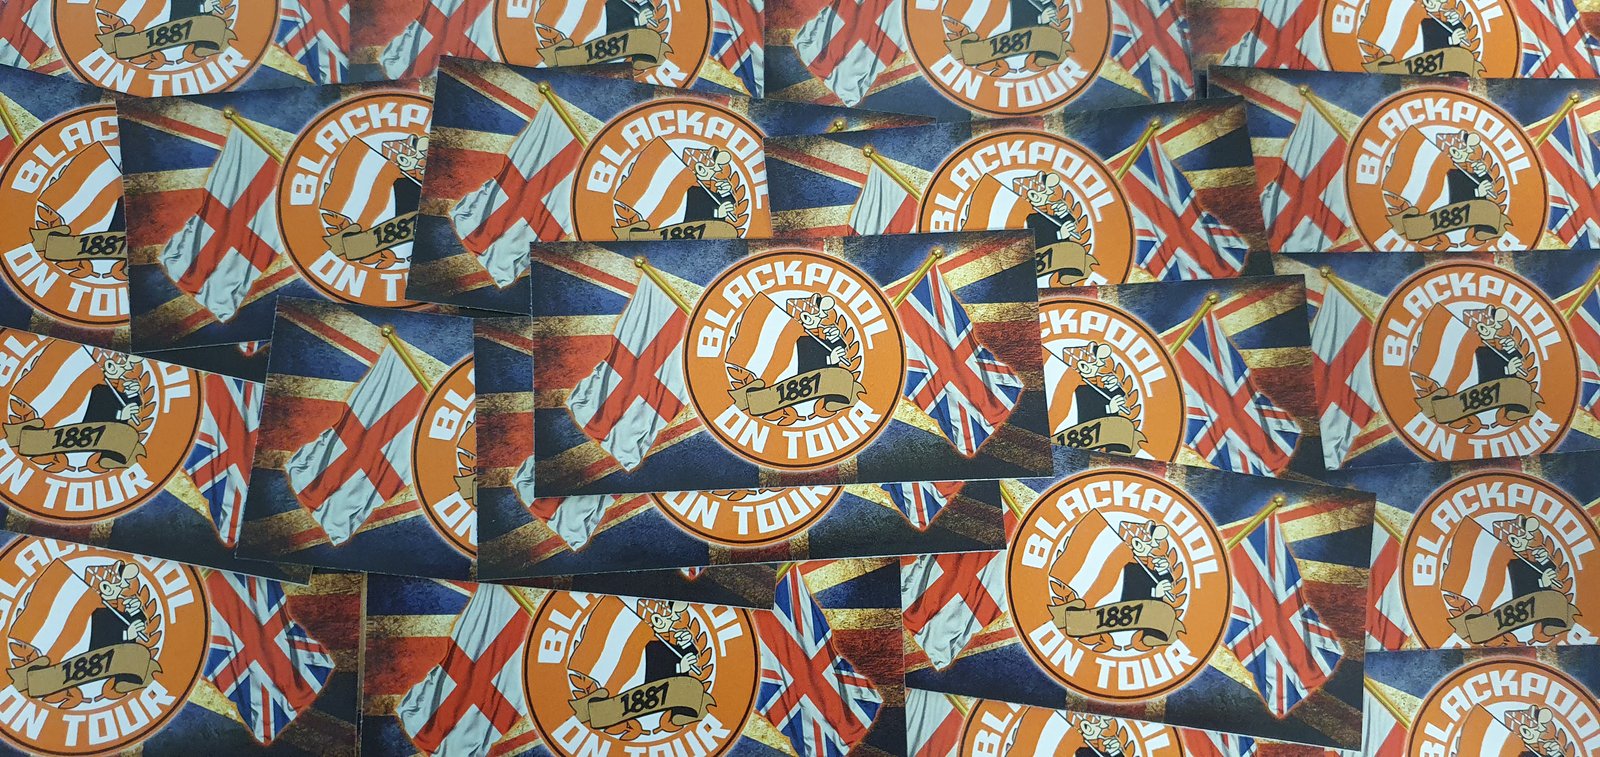 Casuals Attire - 25 Accrington Stickers just £3 available on the website  now. Please share and tag your mates.